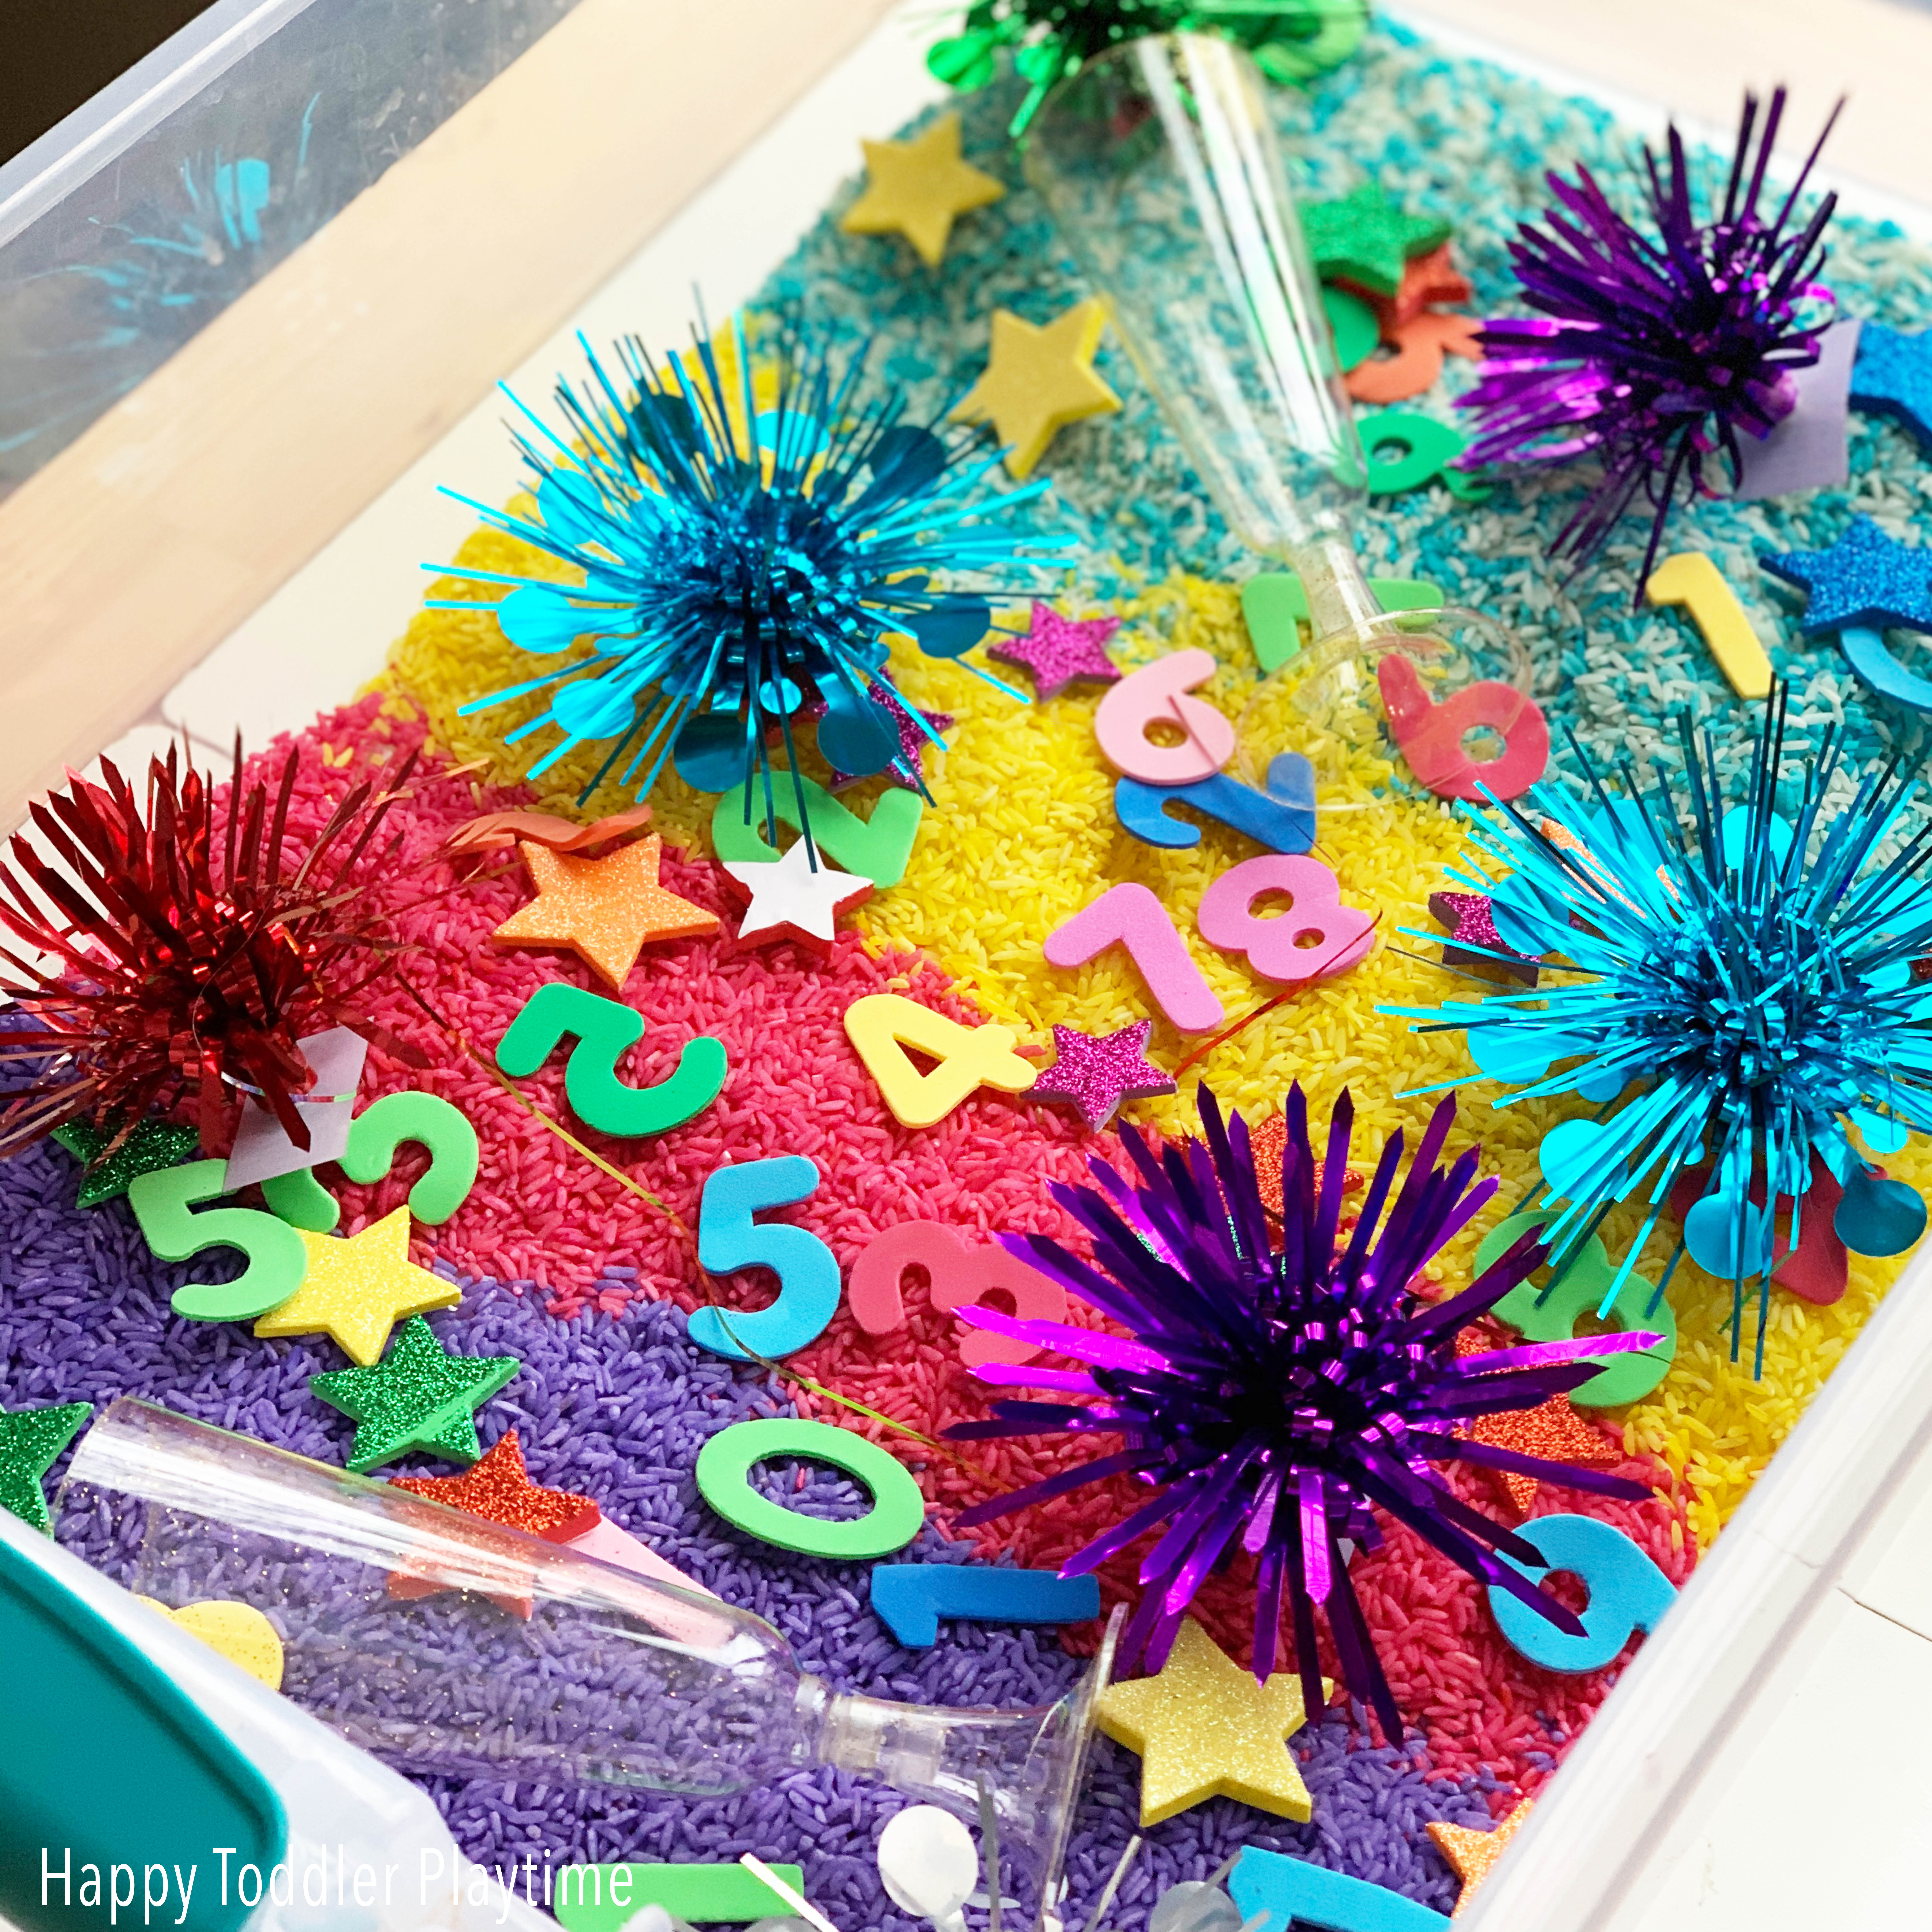 Sensory activities are a fun way to ring in the new year with your toddler. Here are two amazing ideas with two very different fillers.